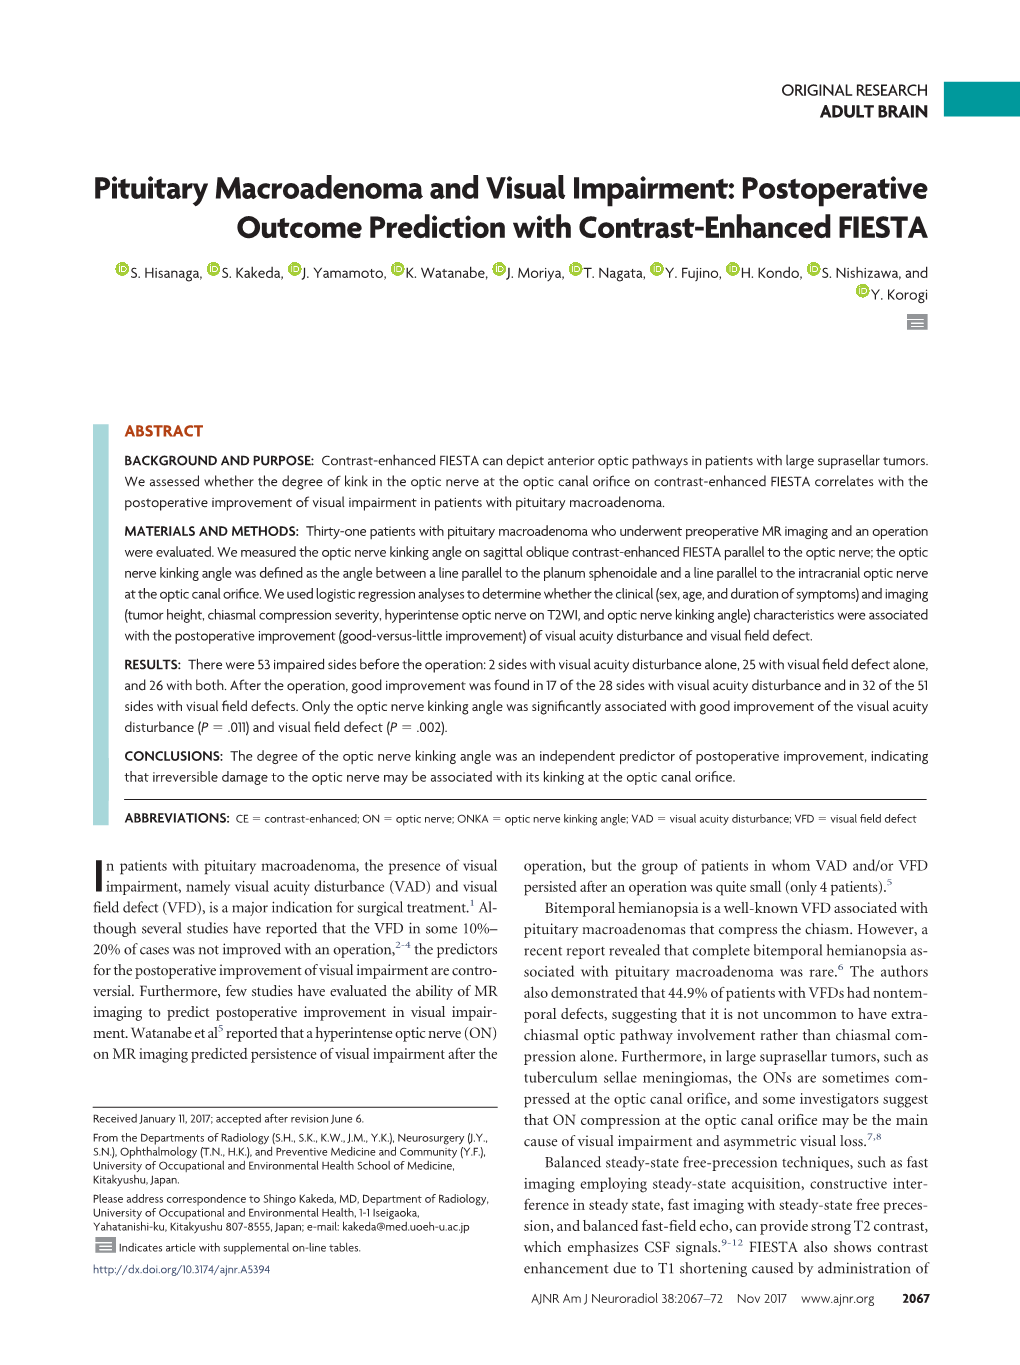 Pituitary Macroadenoma and Visual Impairment: Postoperative Outcome Prediction with Contrast-Enhanced FIESTA